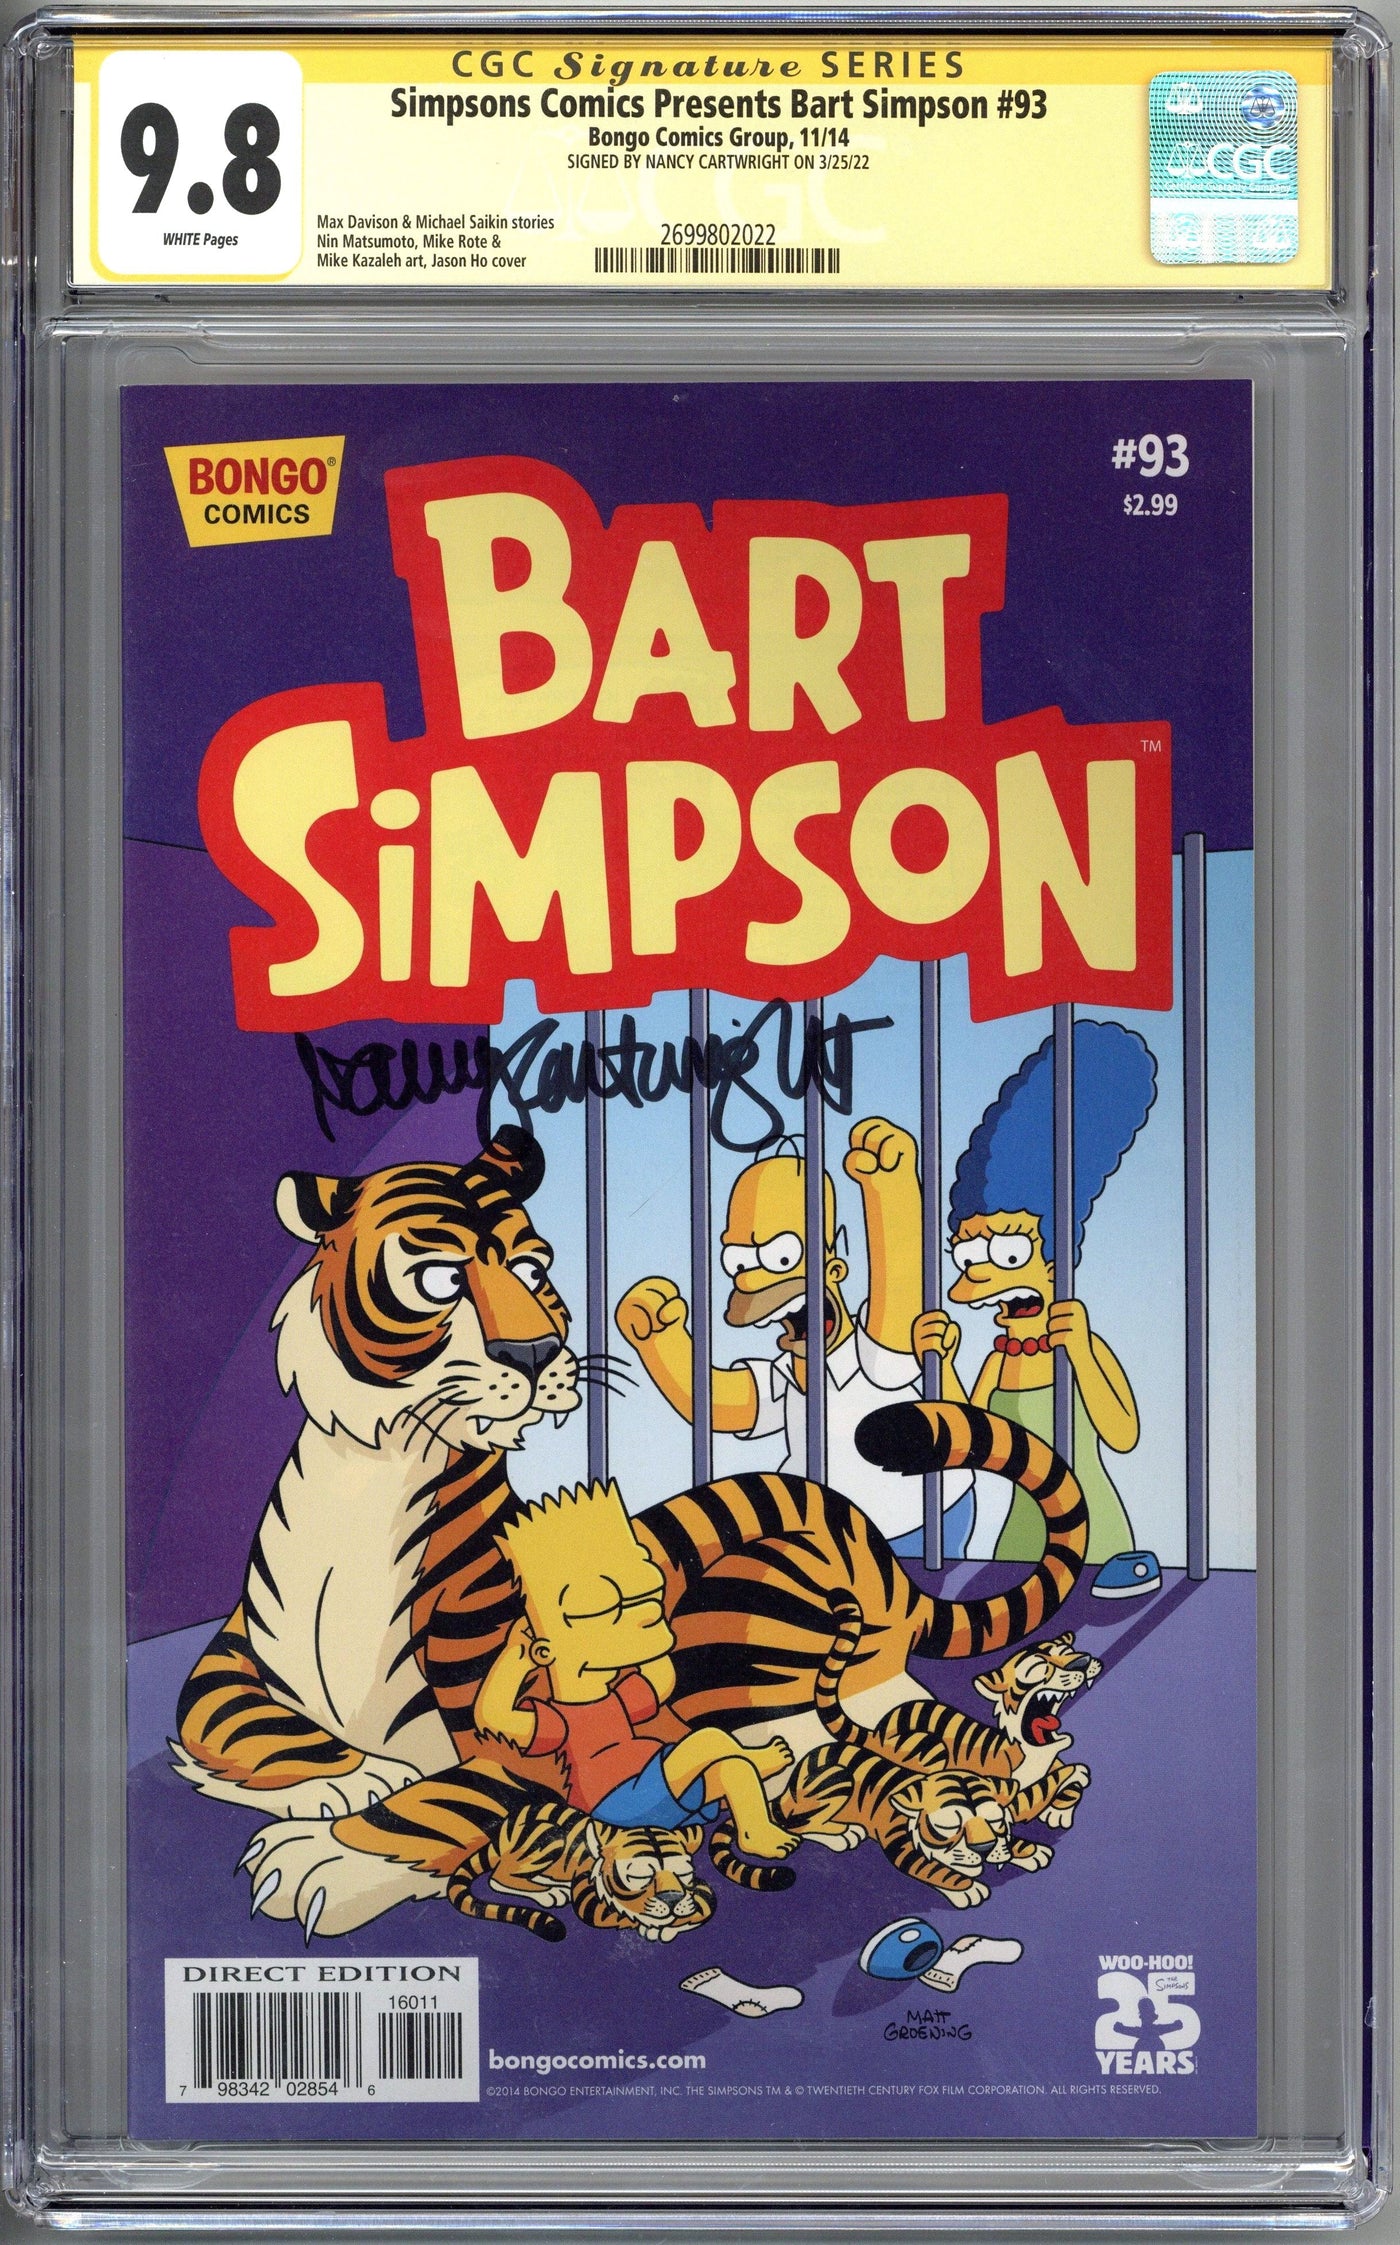 NANCY CARTWRIGHT SIGNED BART SIMPSON COMIC BOOK CGC 9.8 AUTOGRAPHED NC6